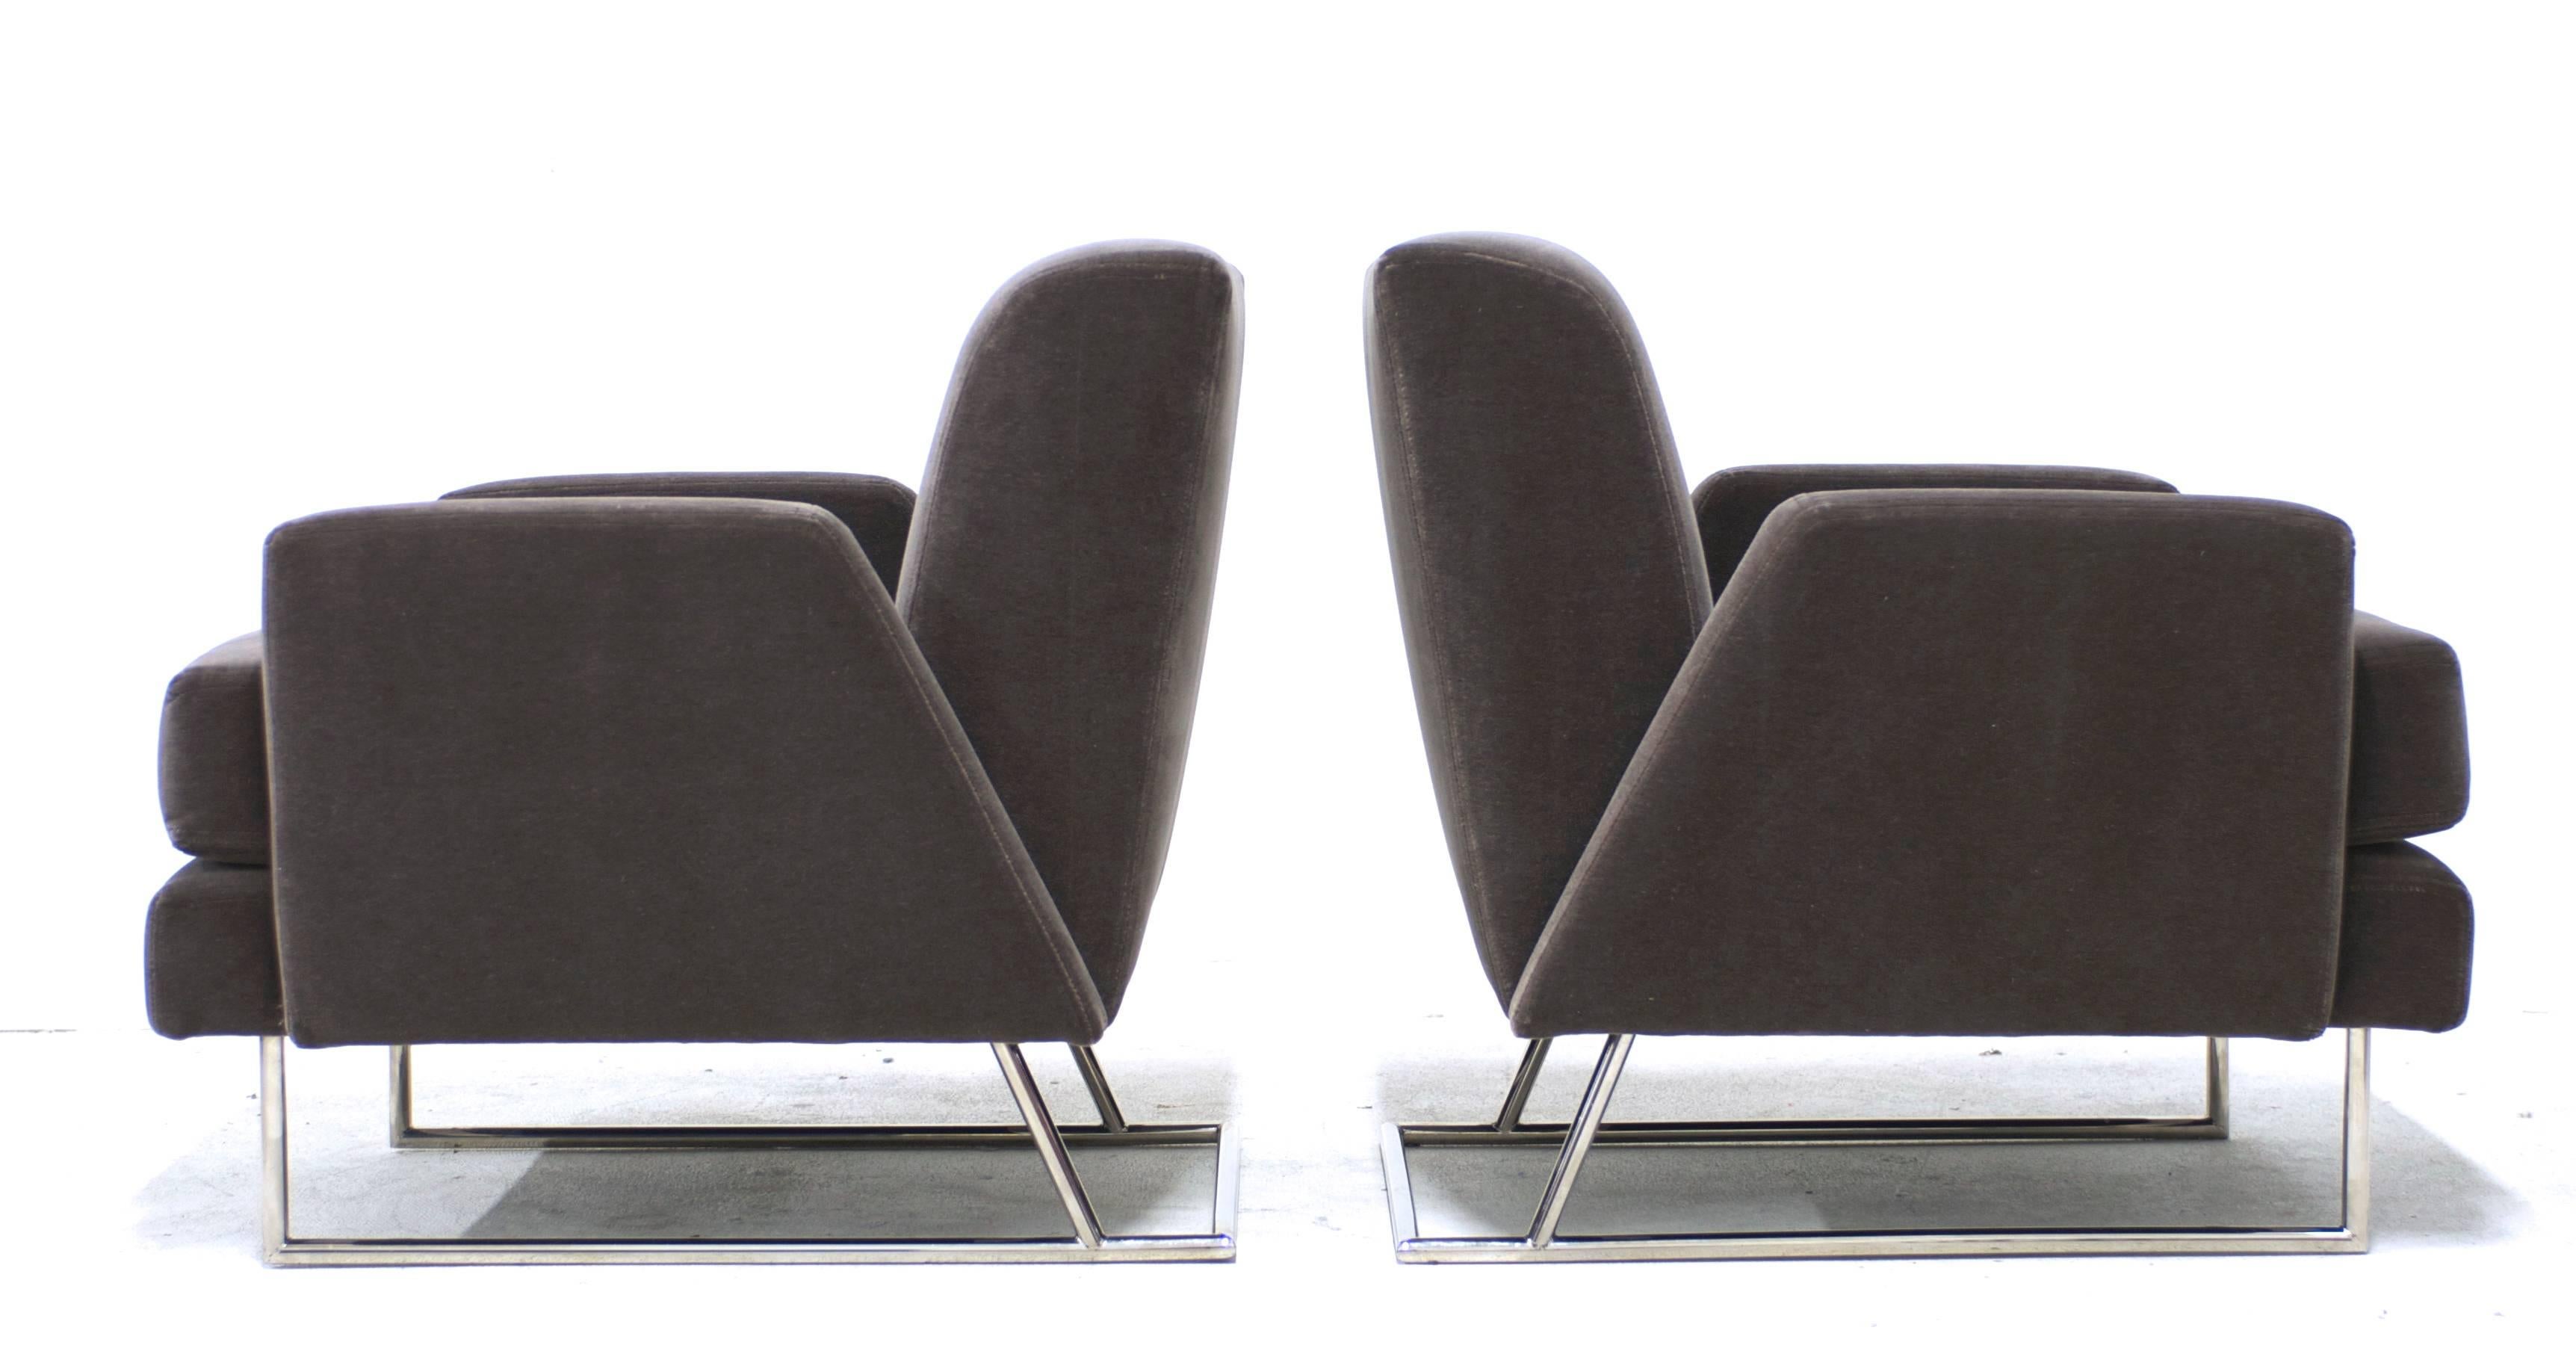 In the style of Paul Tuttle this Postmodern pair of lounge chairs have been reupholstered in a luxe deep taupe mohair the color of Weimaraners. The polished steel bases have a nice sculptural angle at the back which follows the line of the back of